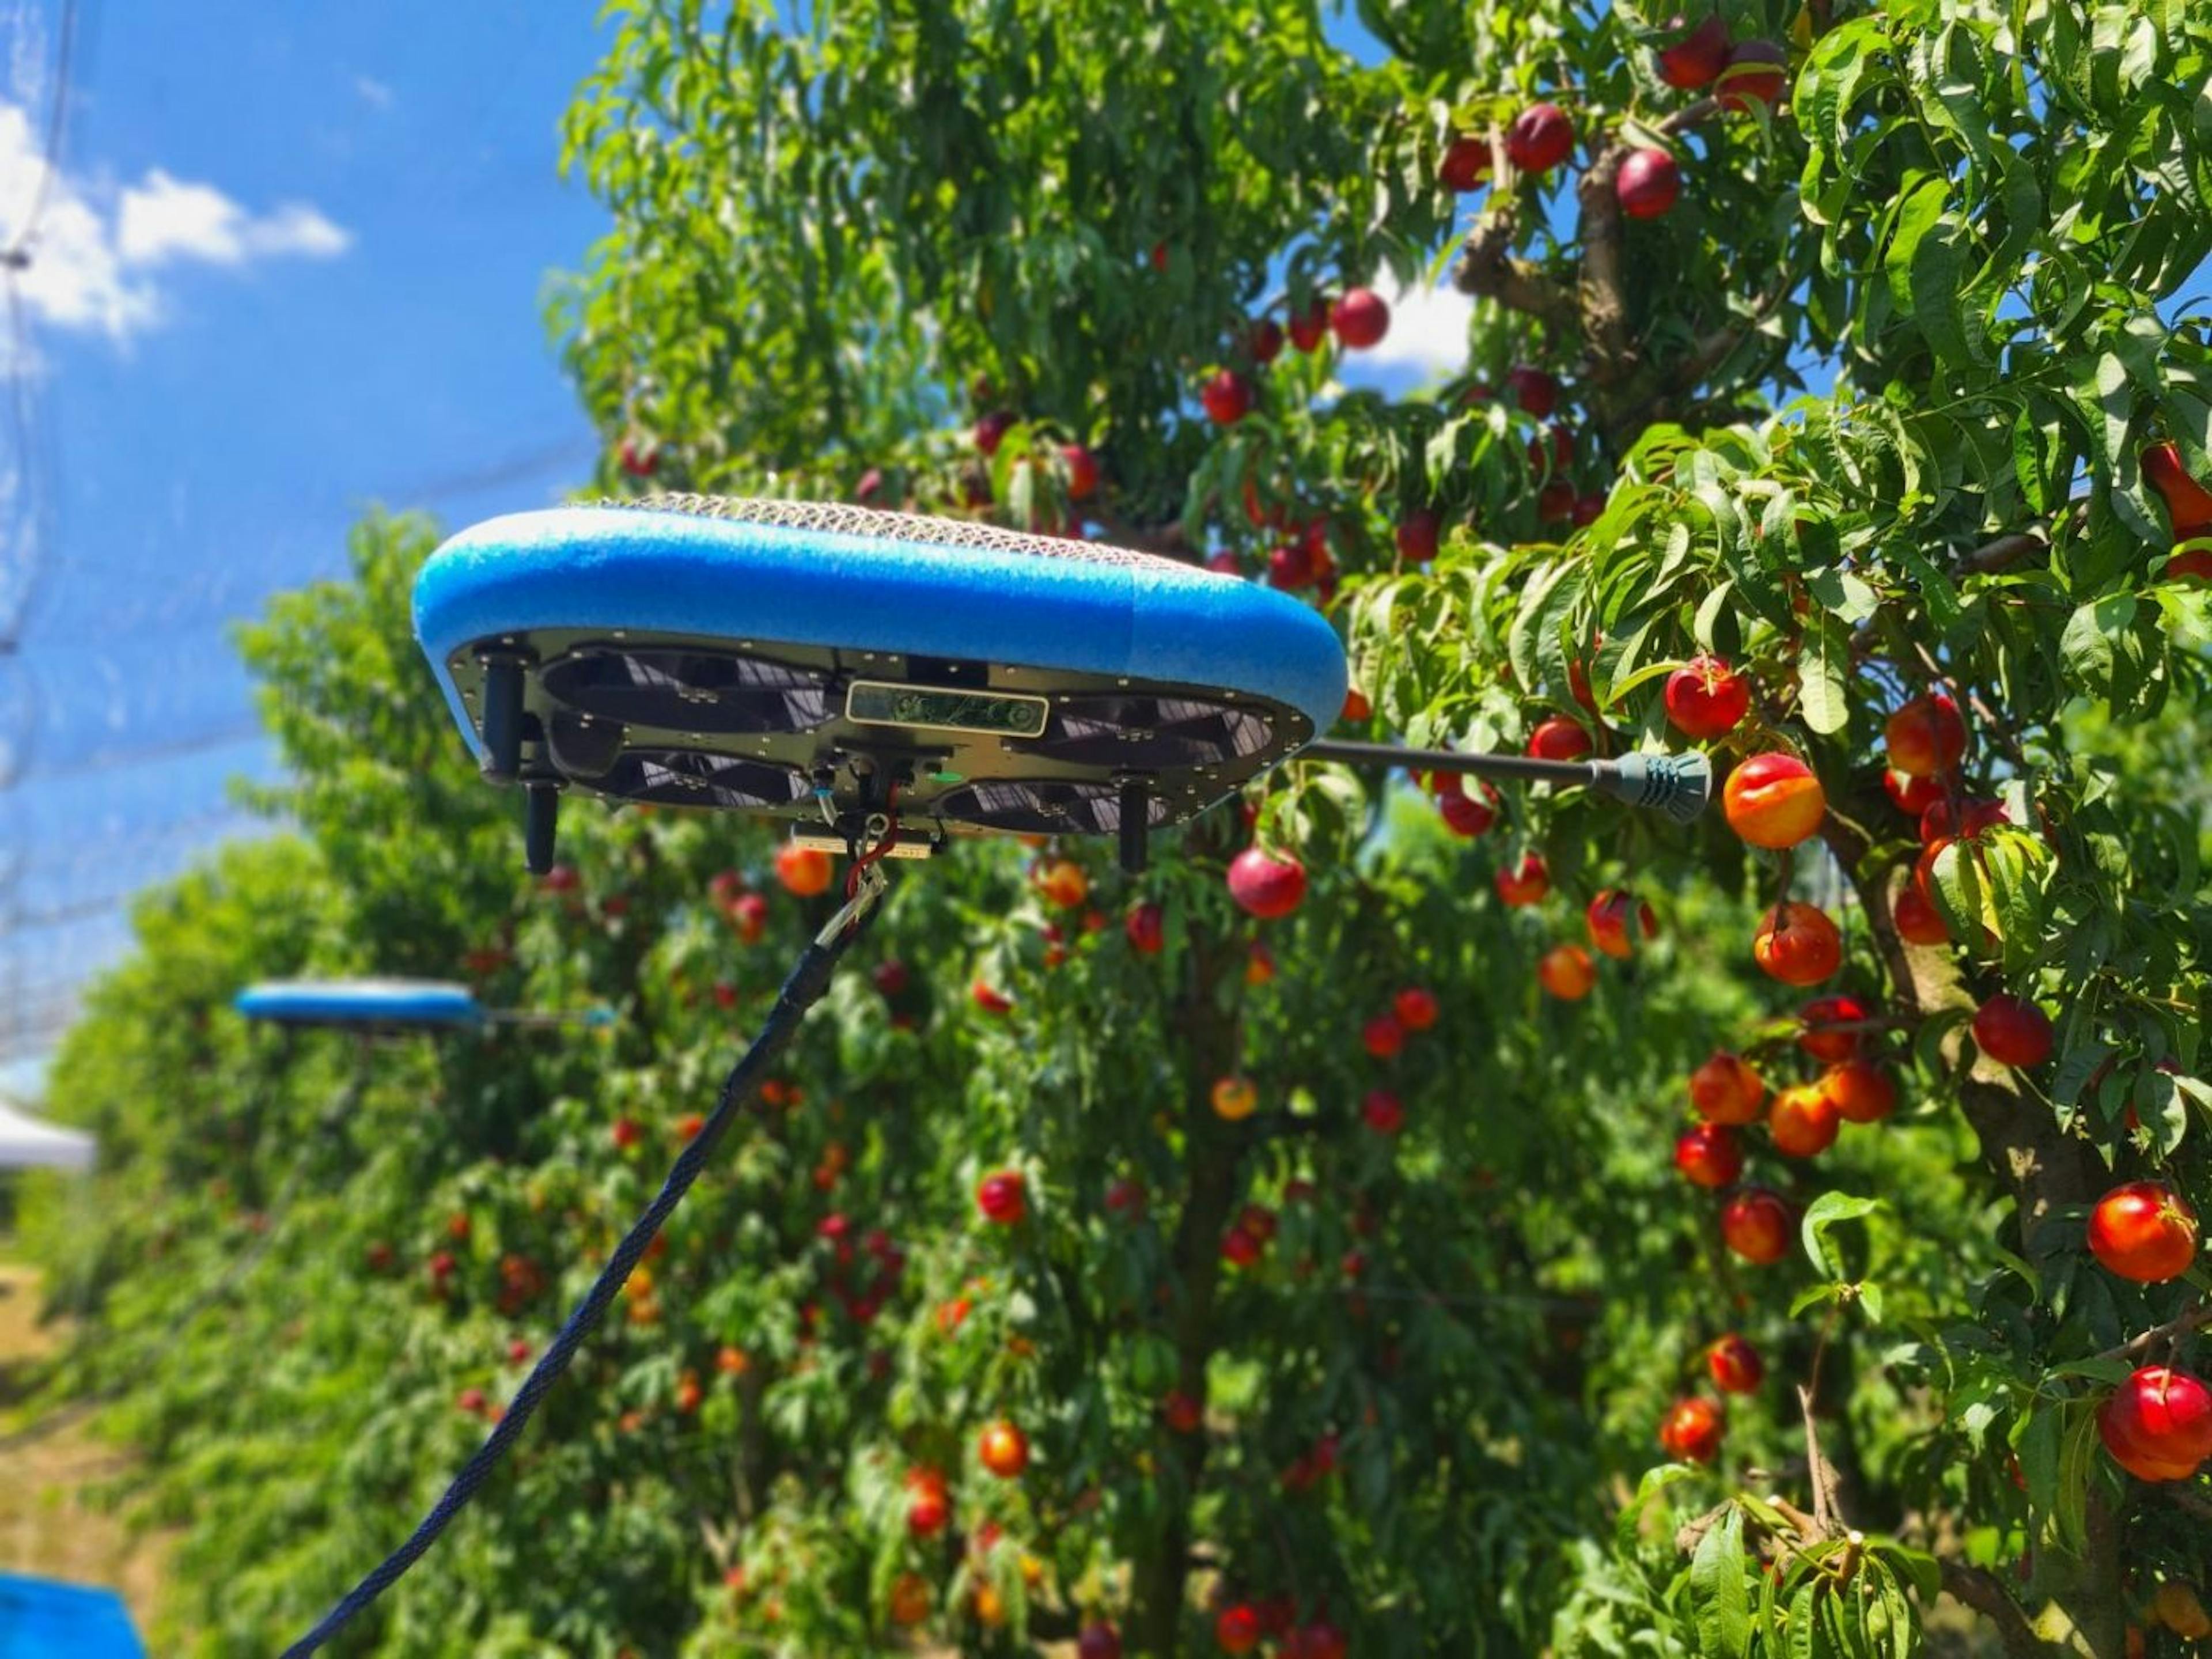 Robotic systems harvesting crops at a rate humans can not compete with.